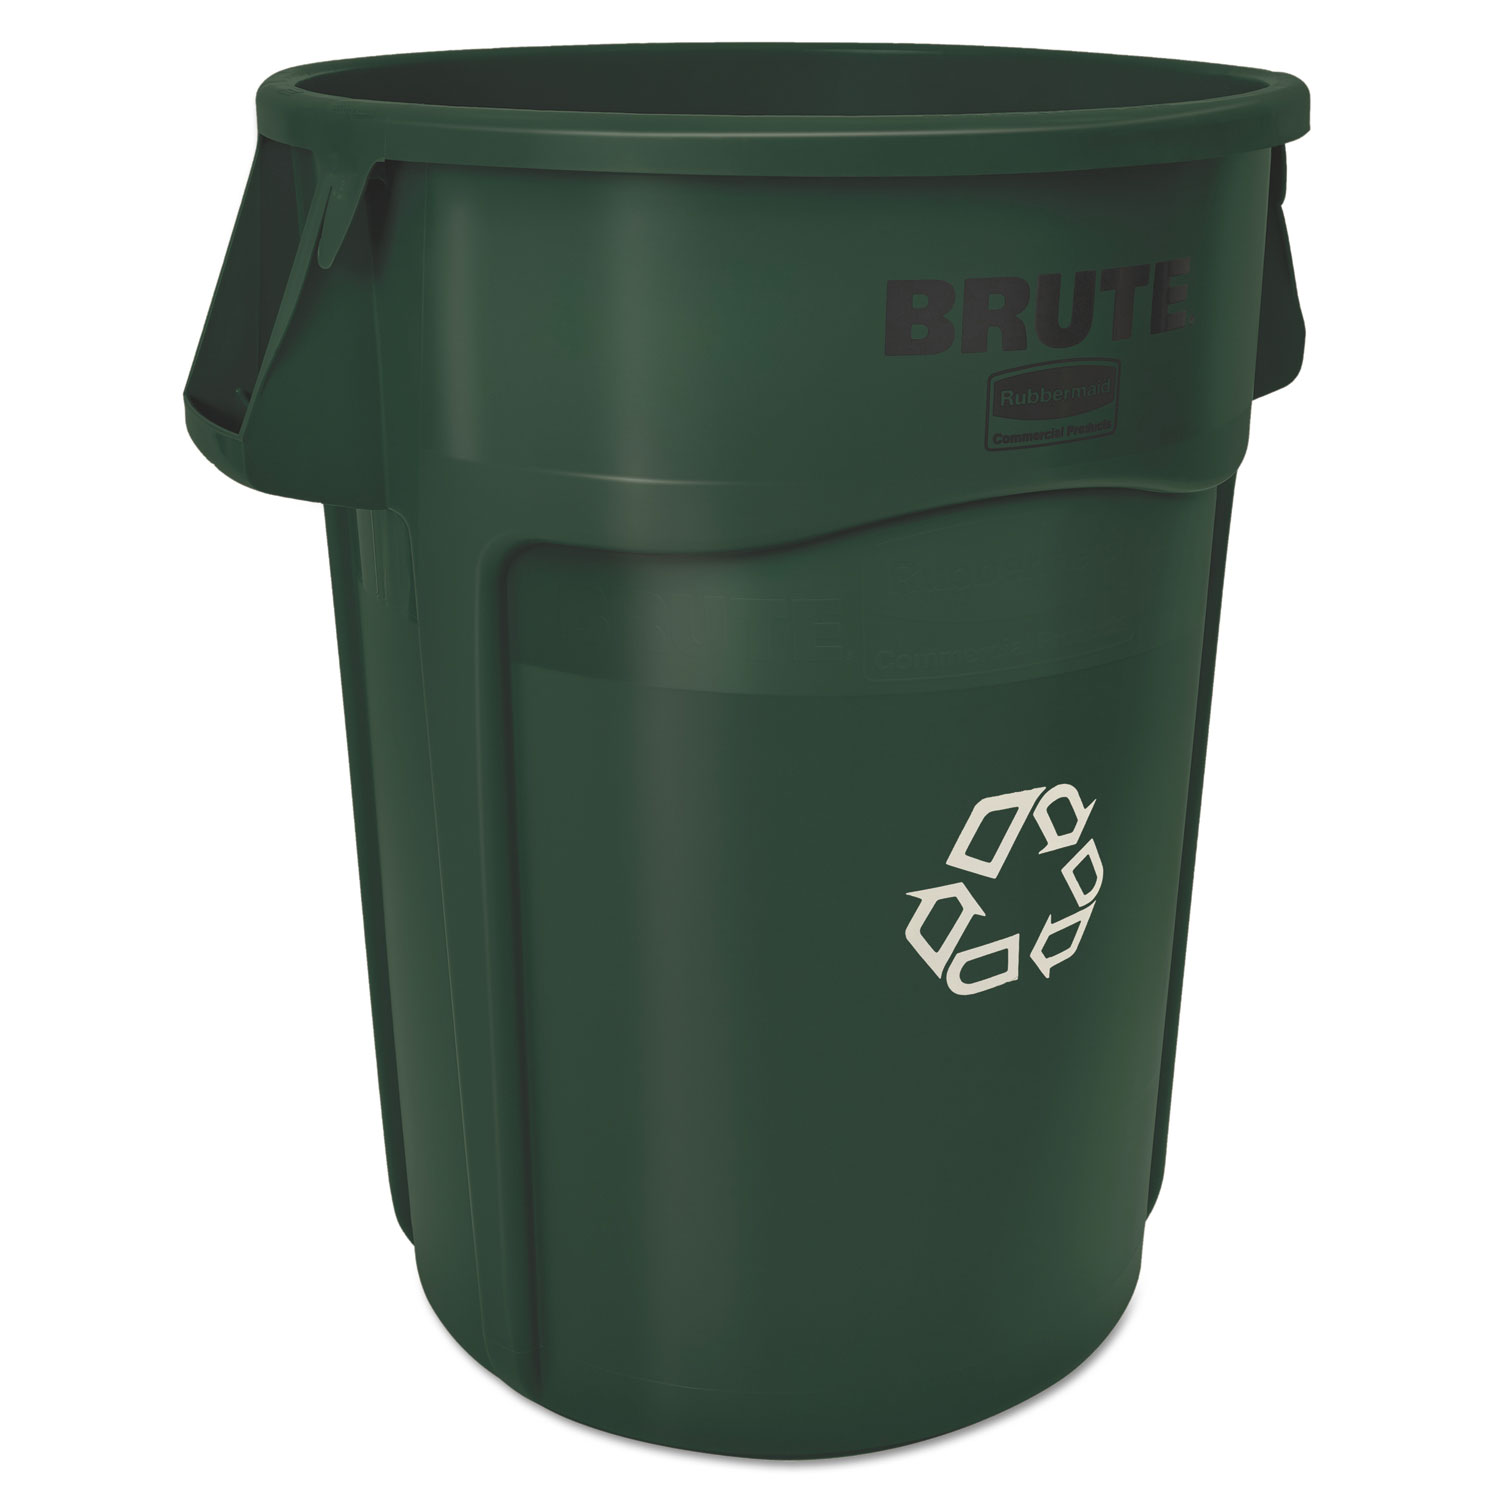  Rubbermaid Commercial 1926829 Brute Recycling Container, Round, 44 gal, Dark Green (RCP1926829) 